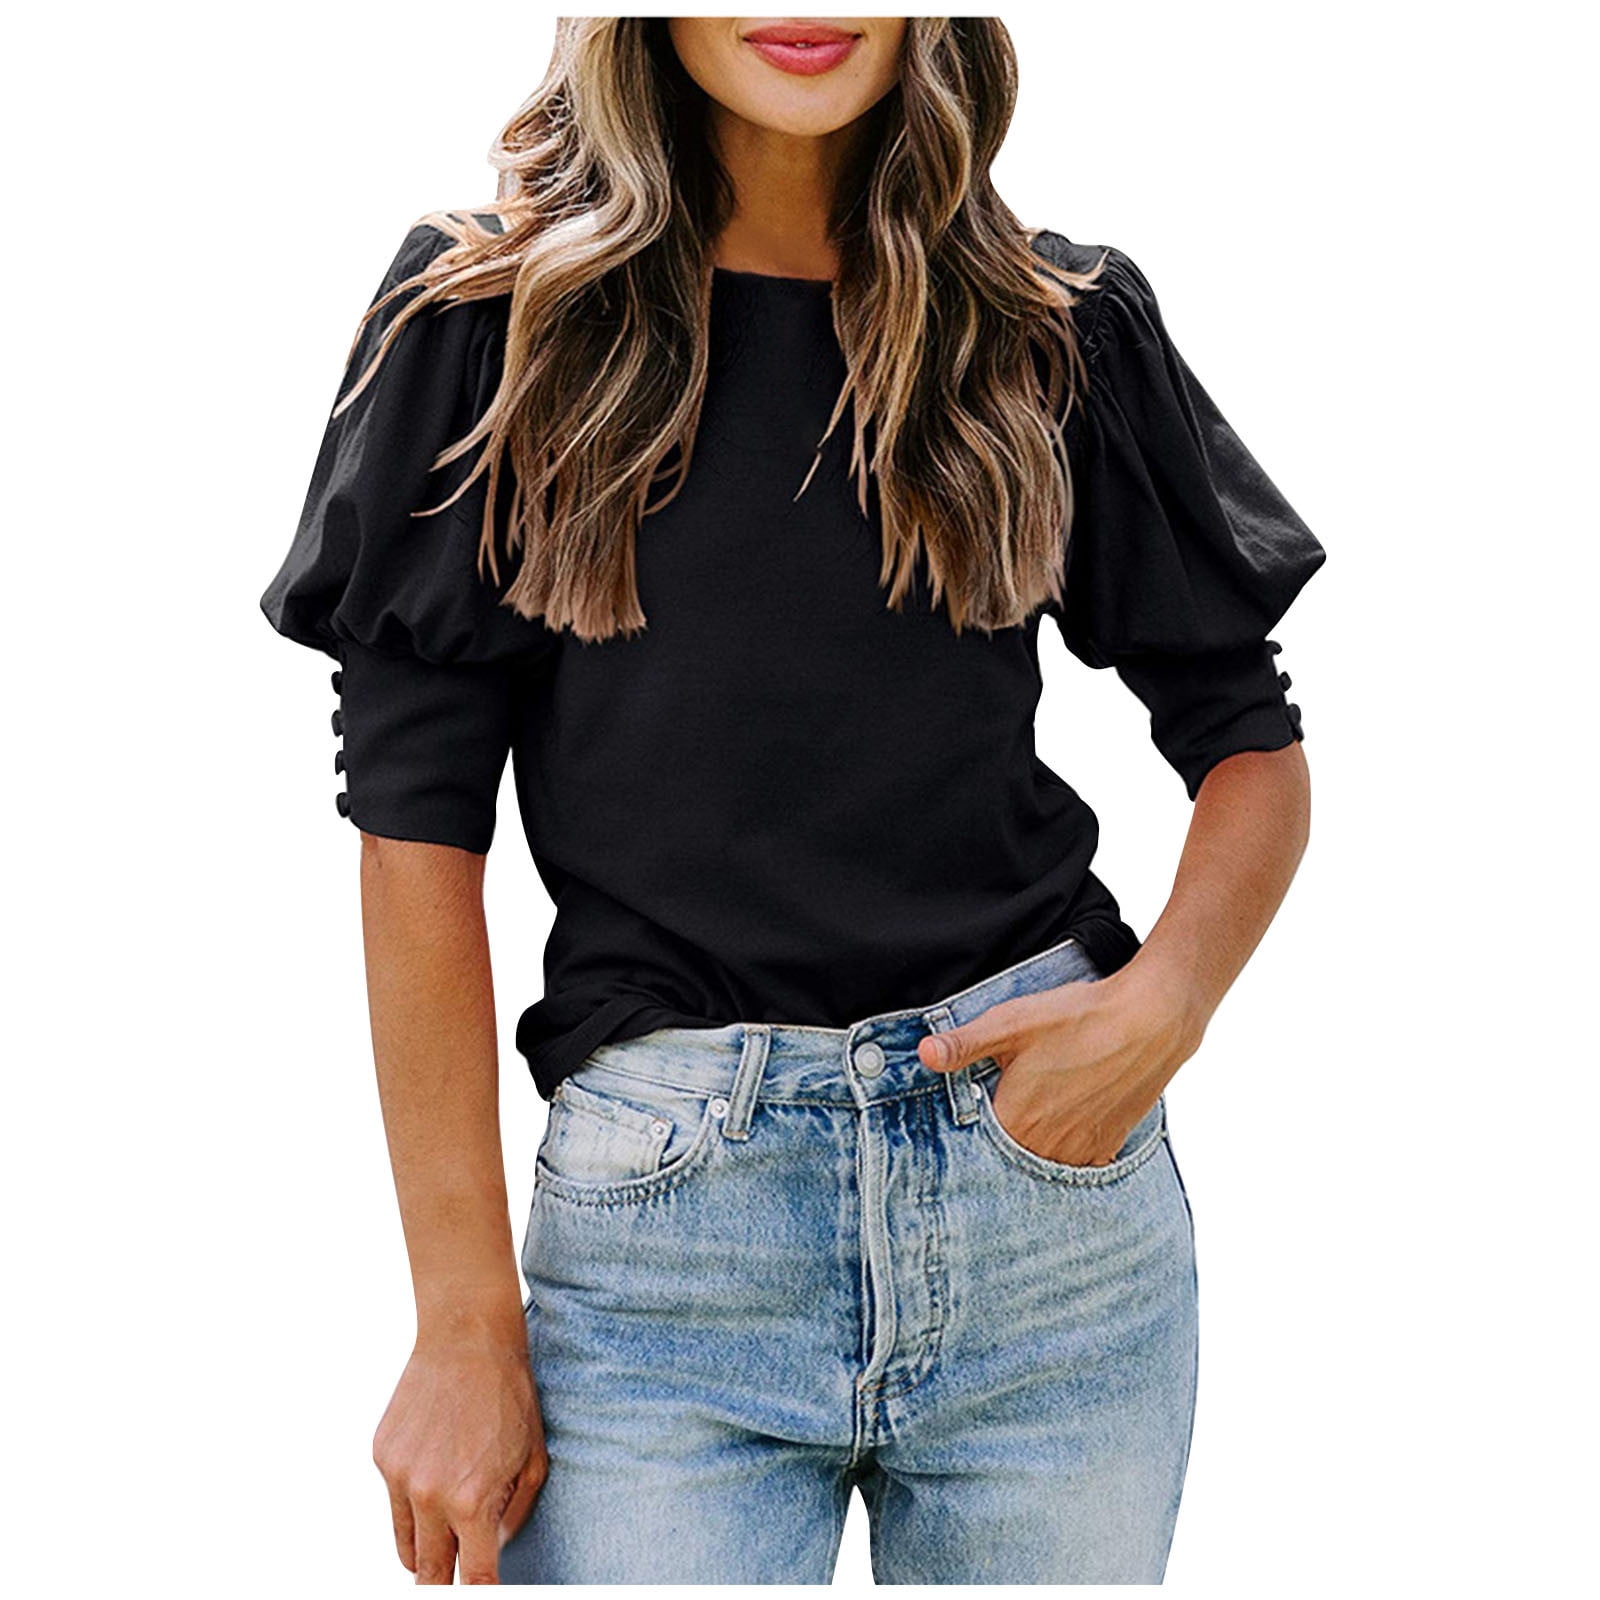 Women Blouses Cute Printed Round,Clearance Items for Women Clothing,1  Dollar Items only, pre Deals,Stuff for 5 Dollars, Deal for The Day,Cheap  Clothes for Women Black at  Women's Clothing store